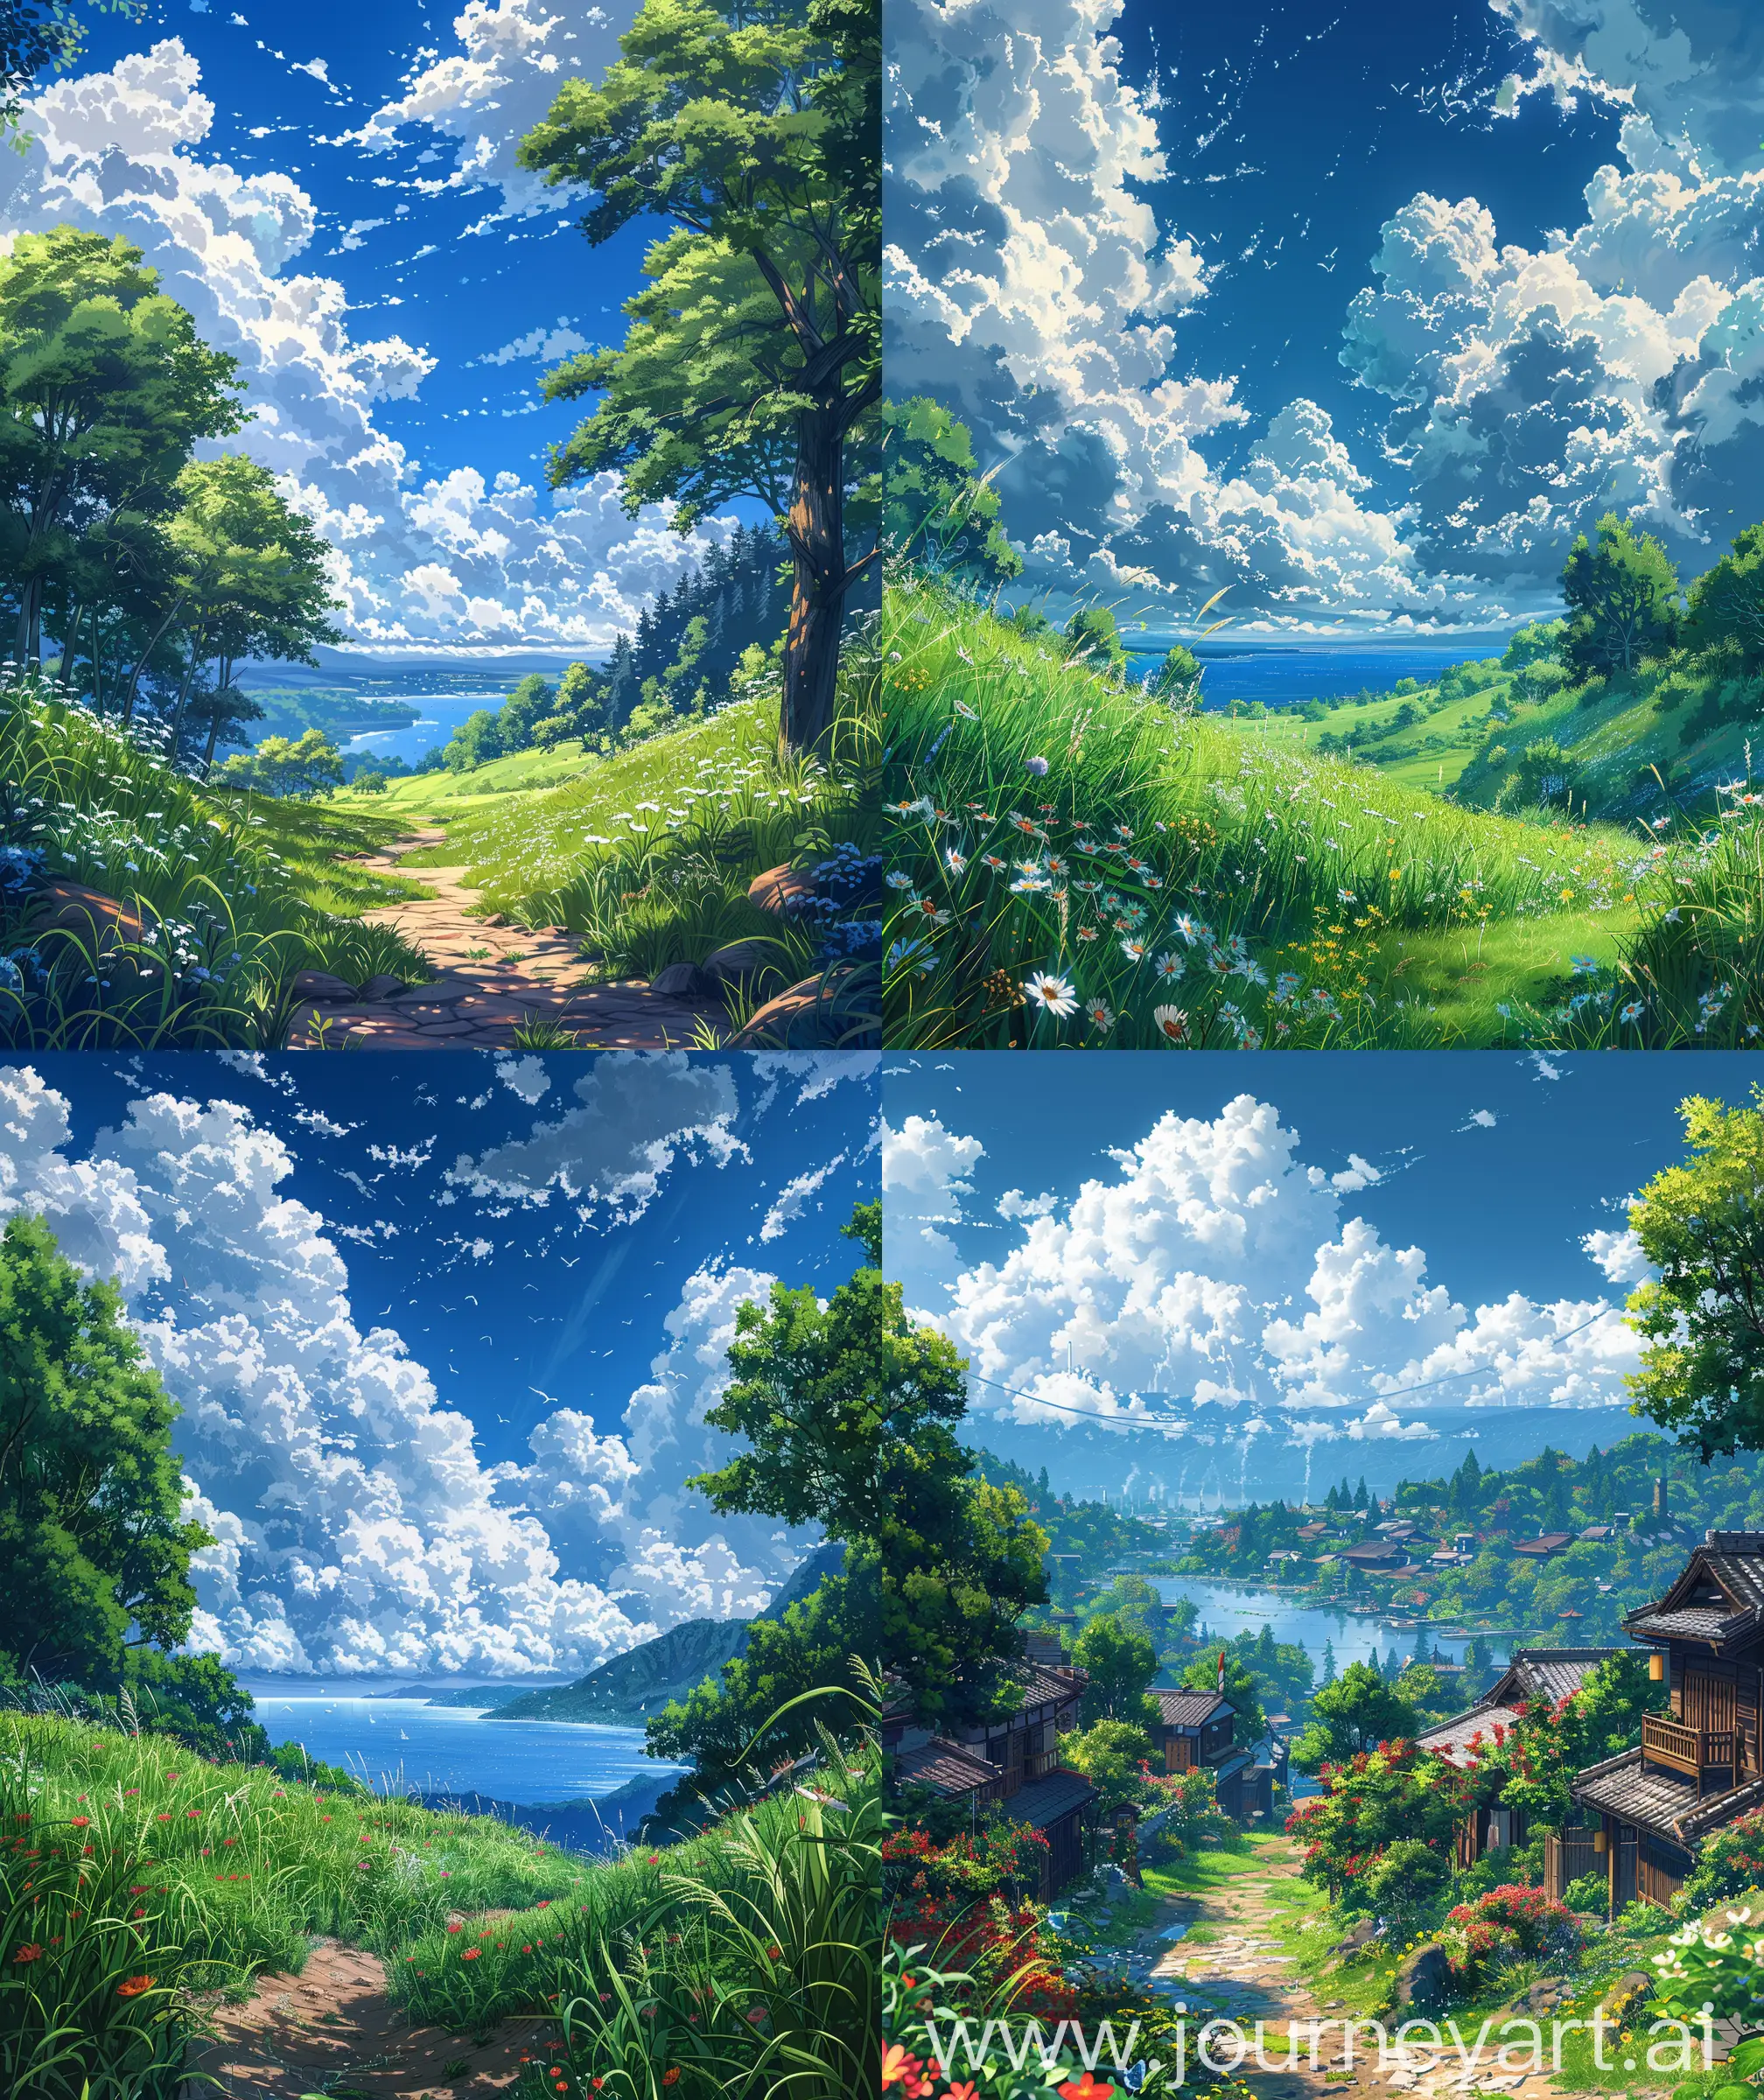 Beautiful anime scenary, mokoto shinkai style,
a beautiful summer time, "verious nature
scenaries ", anime style different places with
quite and calm view, beautiful sky, Day time, illustration ultra HD, high quality, sharp details, no blurry, no hyperrealistic --ar 27:32 --s 600